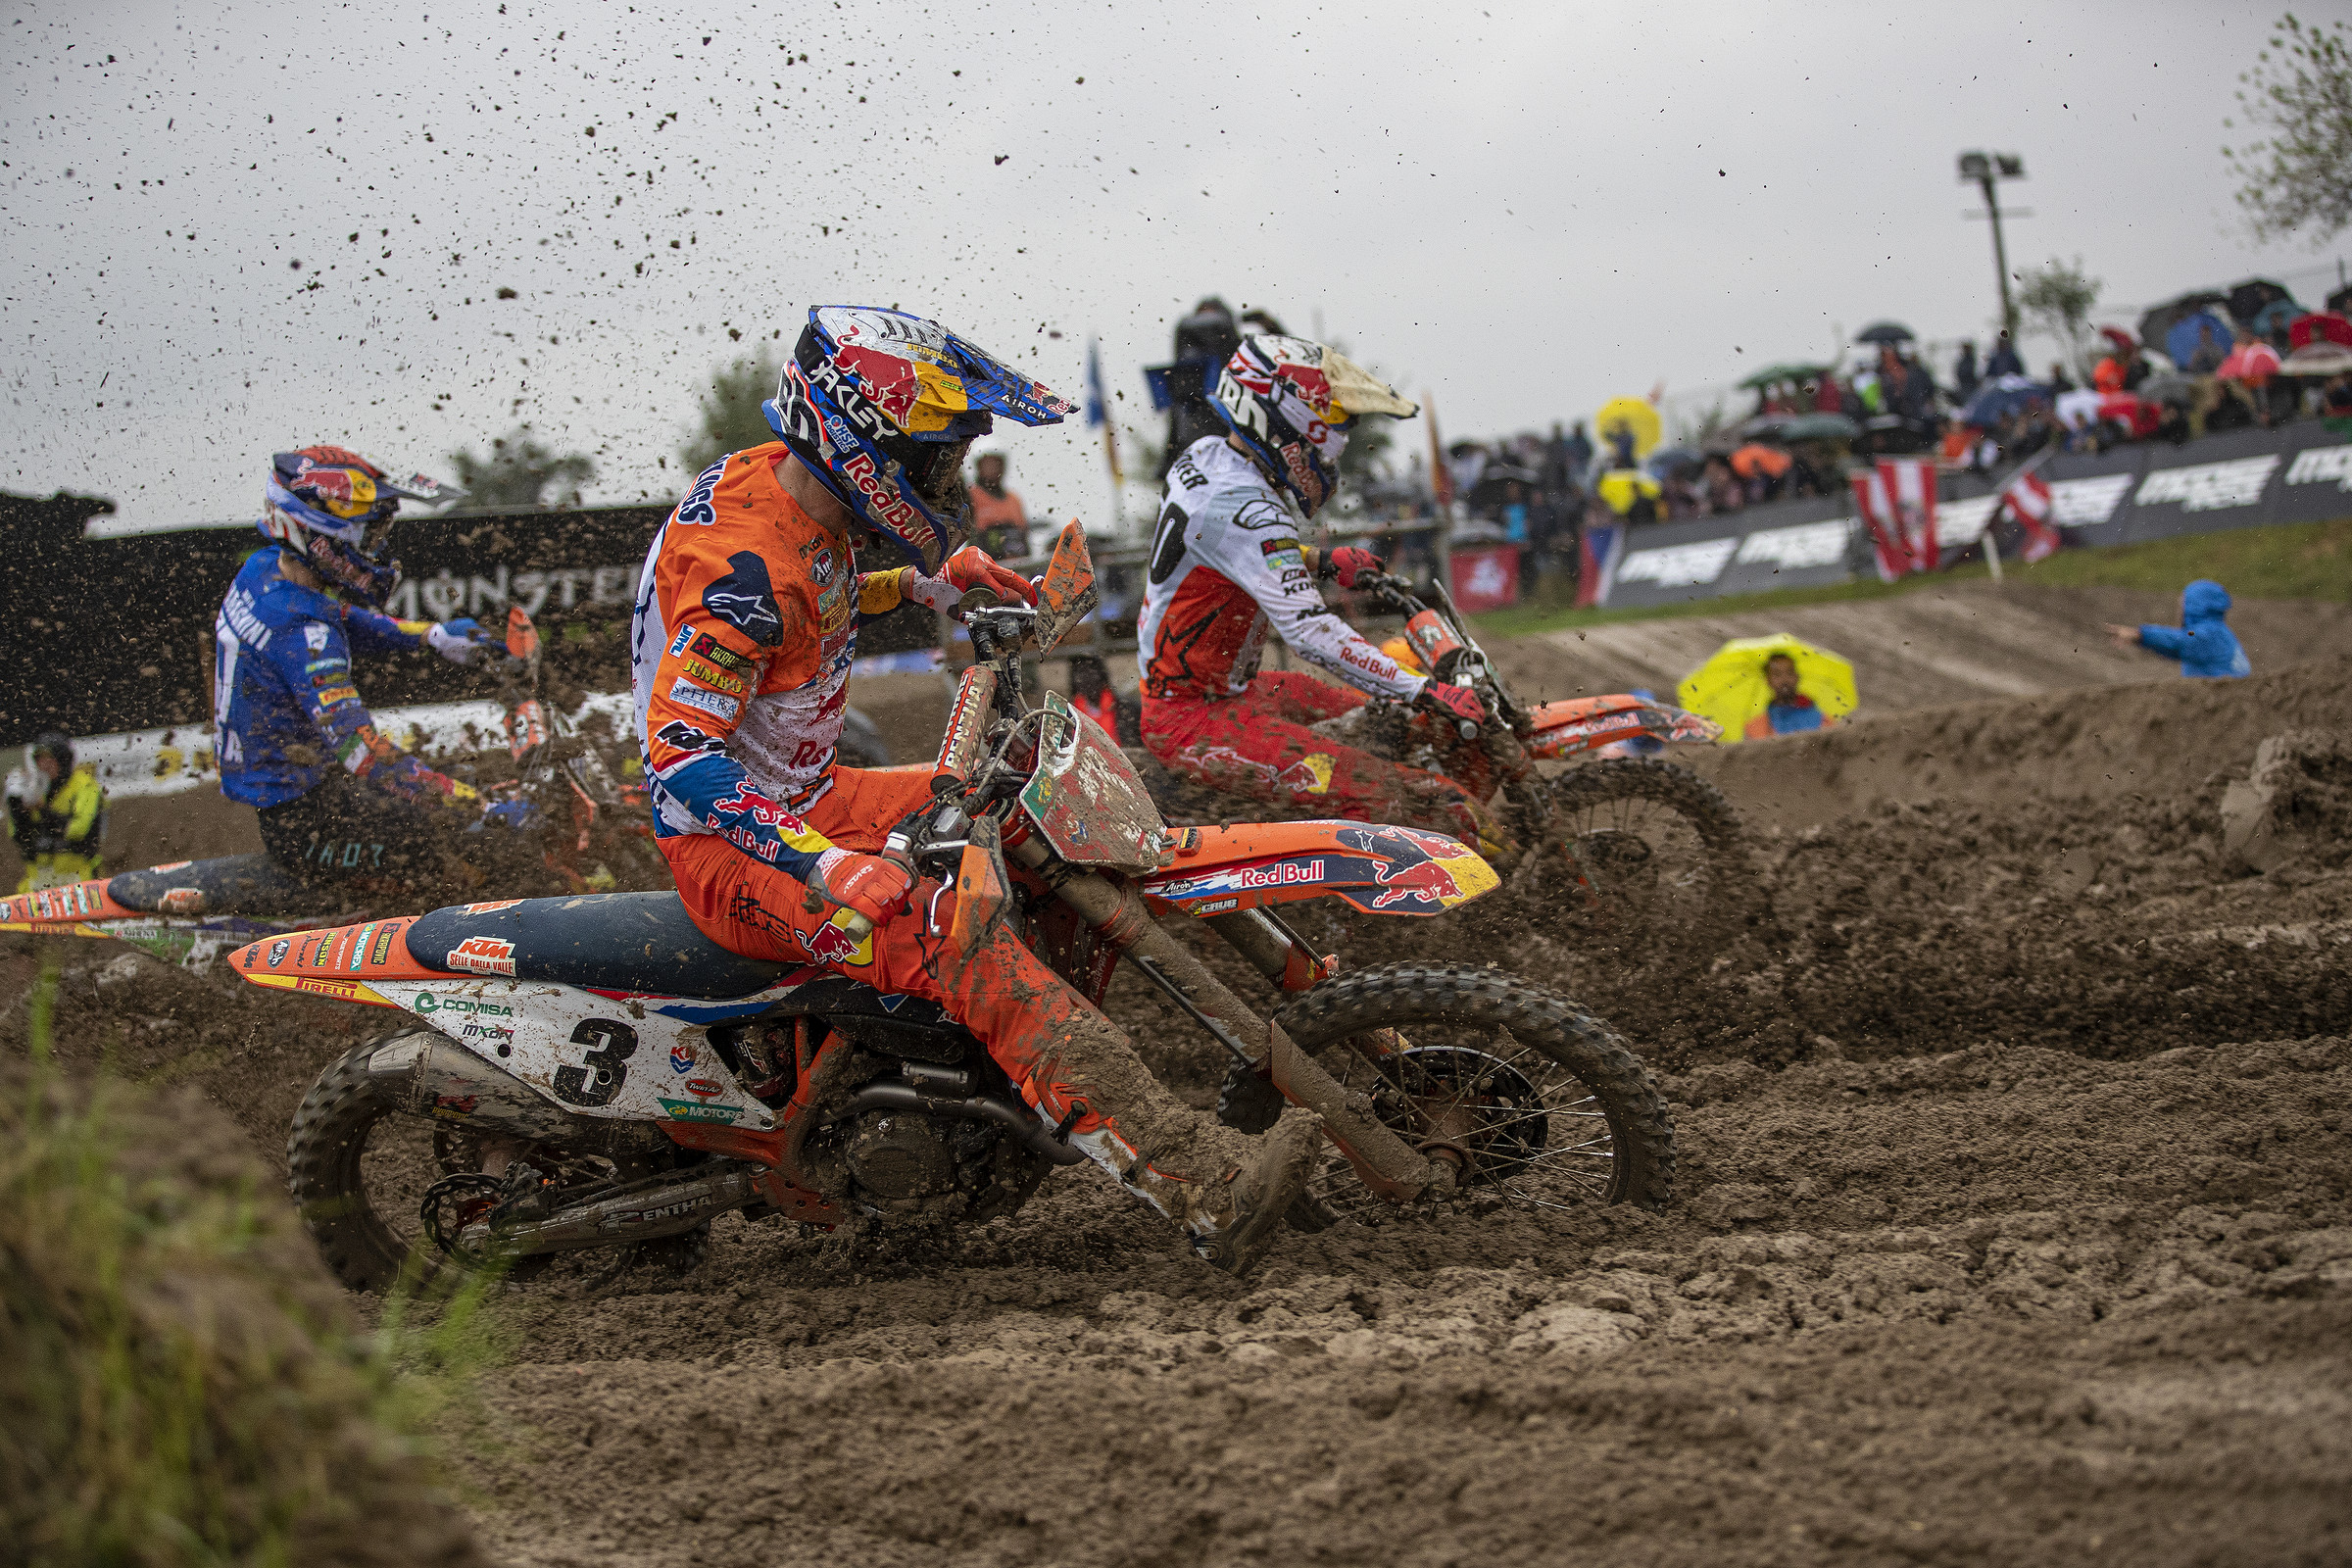 2021 Motocross of Nations Race Report